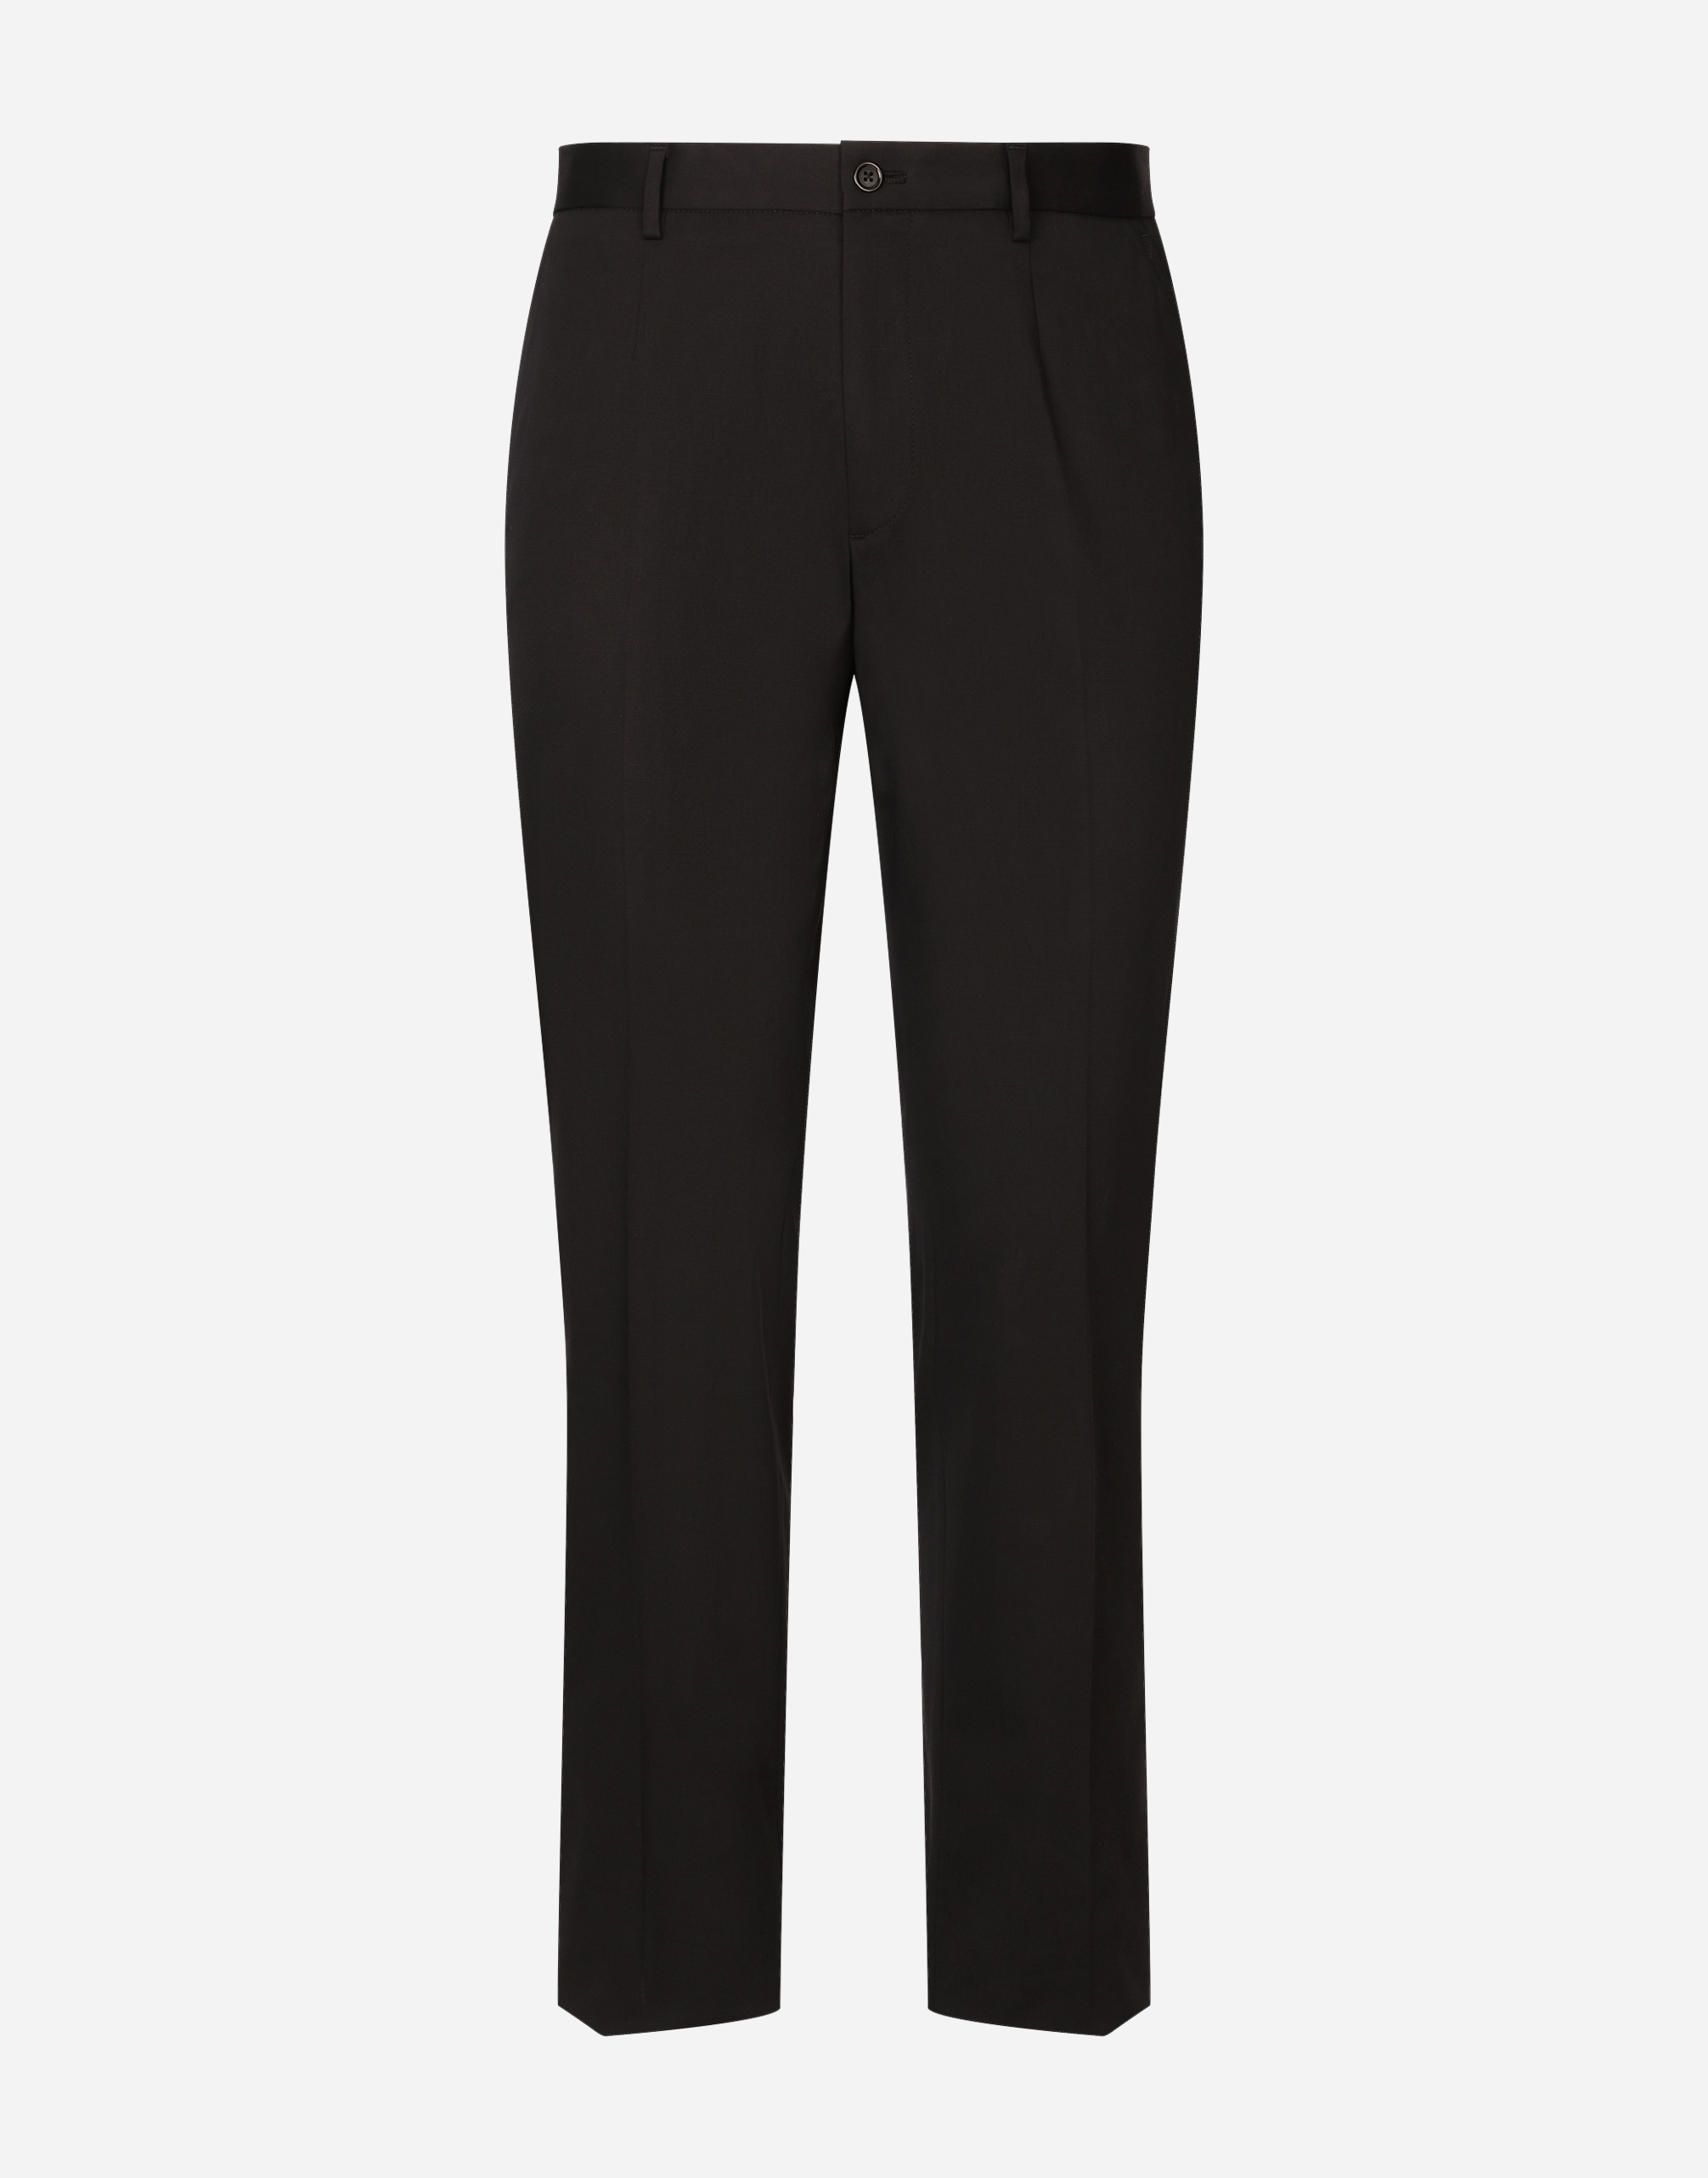 Stretch cotton pants with branded tag in Black